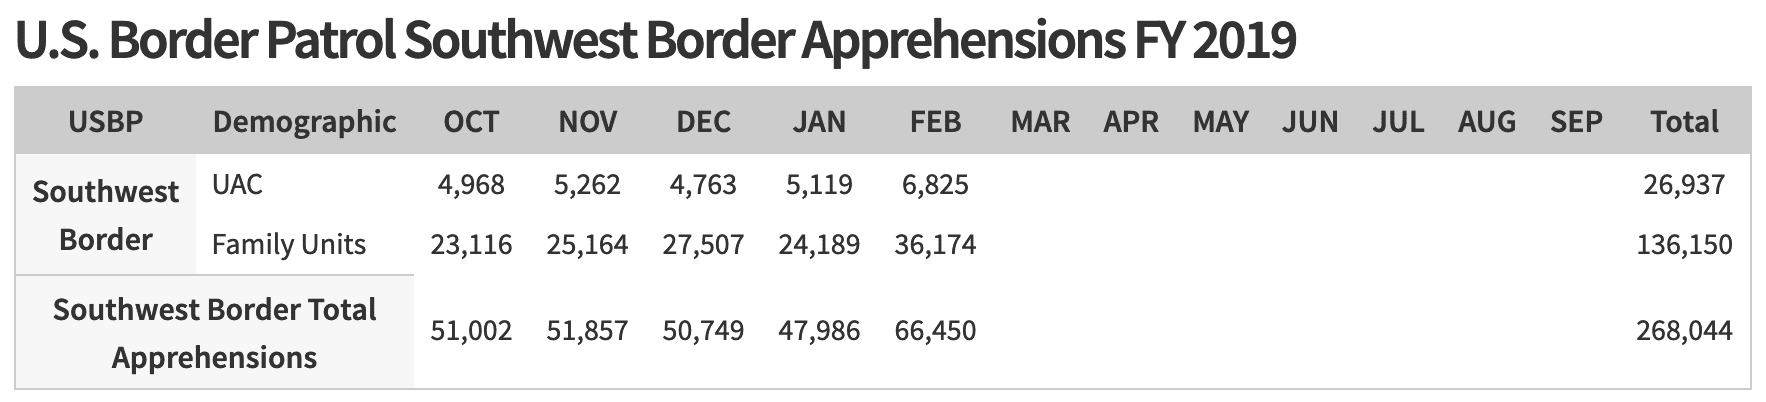 CBP Reports Steep Increase in Inadmissible Family Units Stopped at Border Homeland Security Today